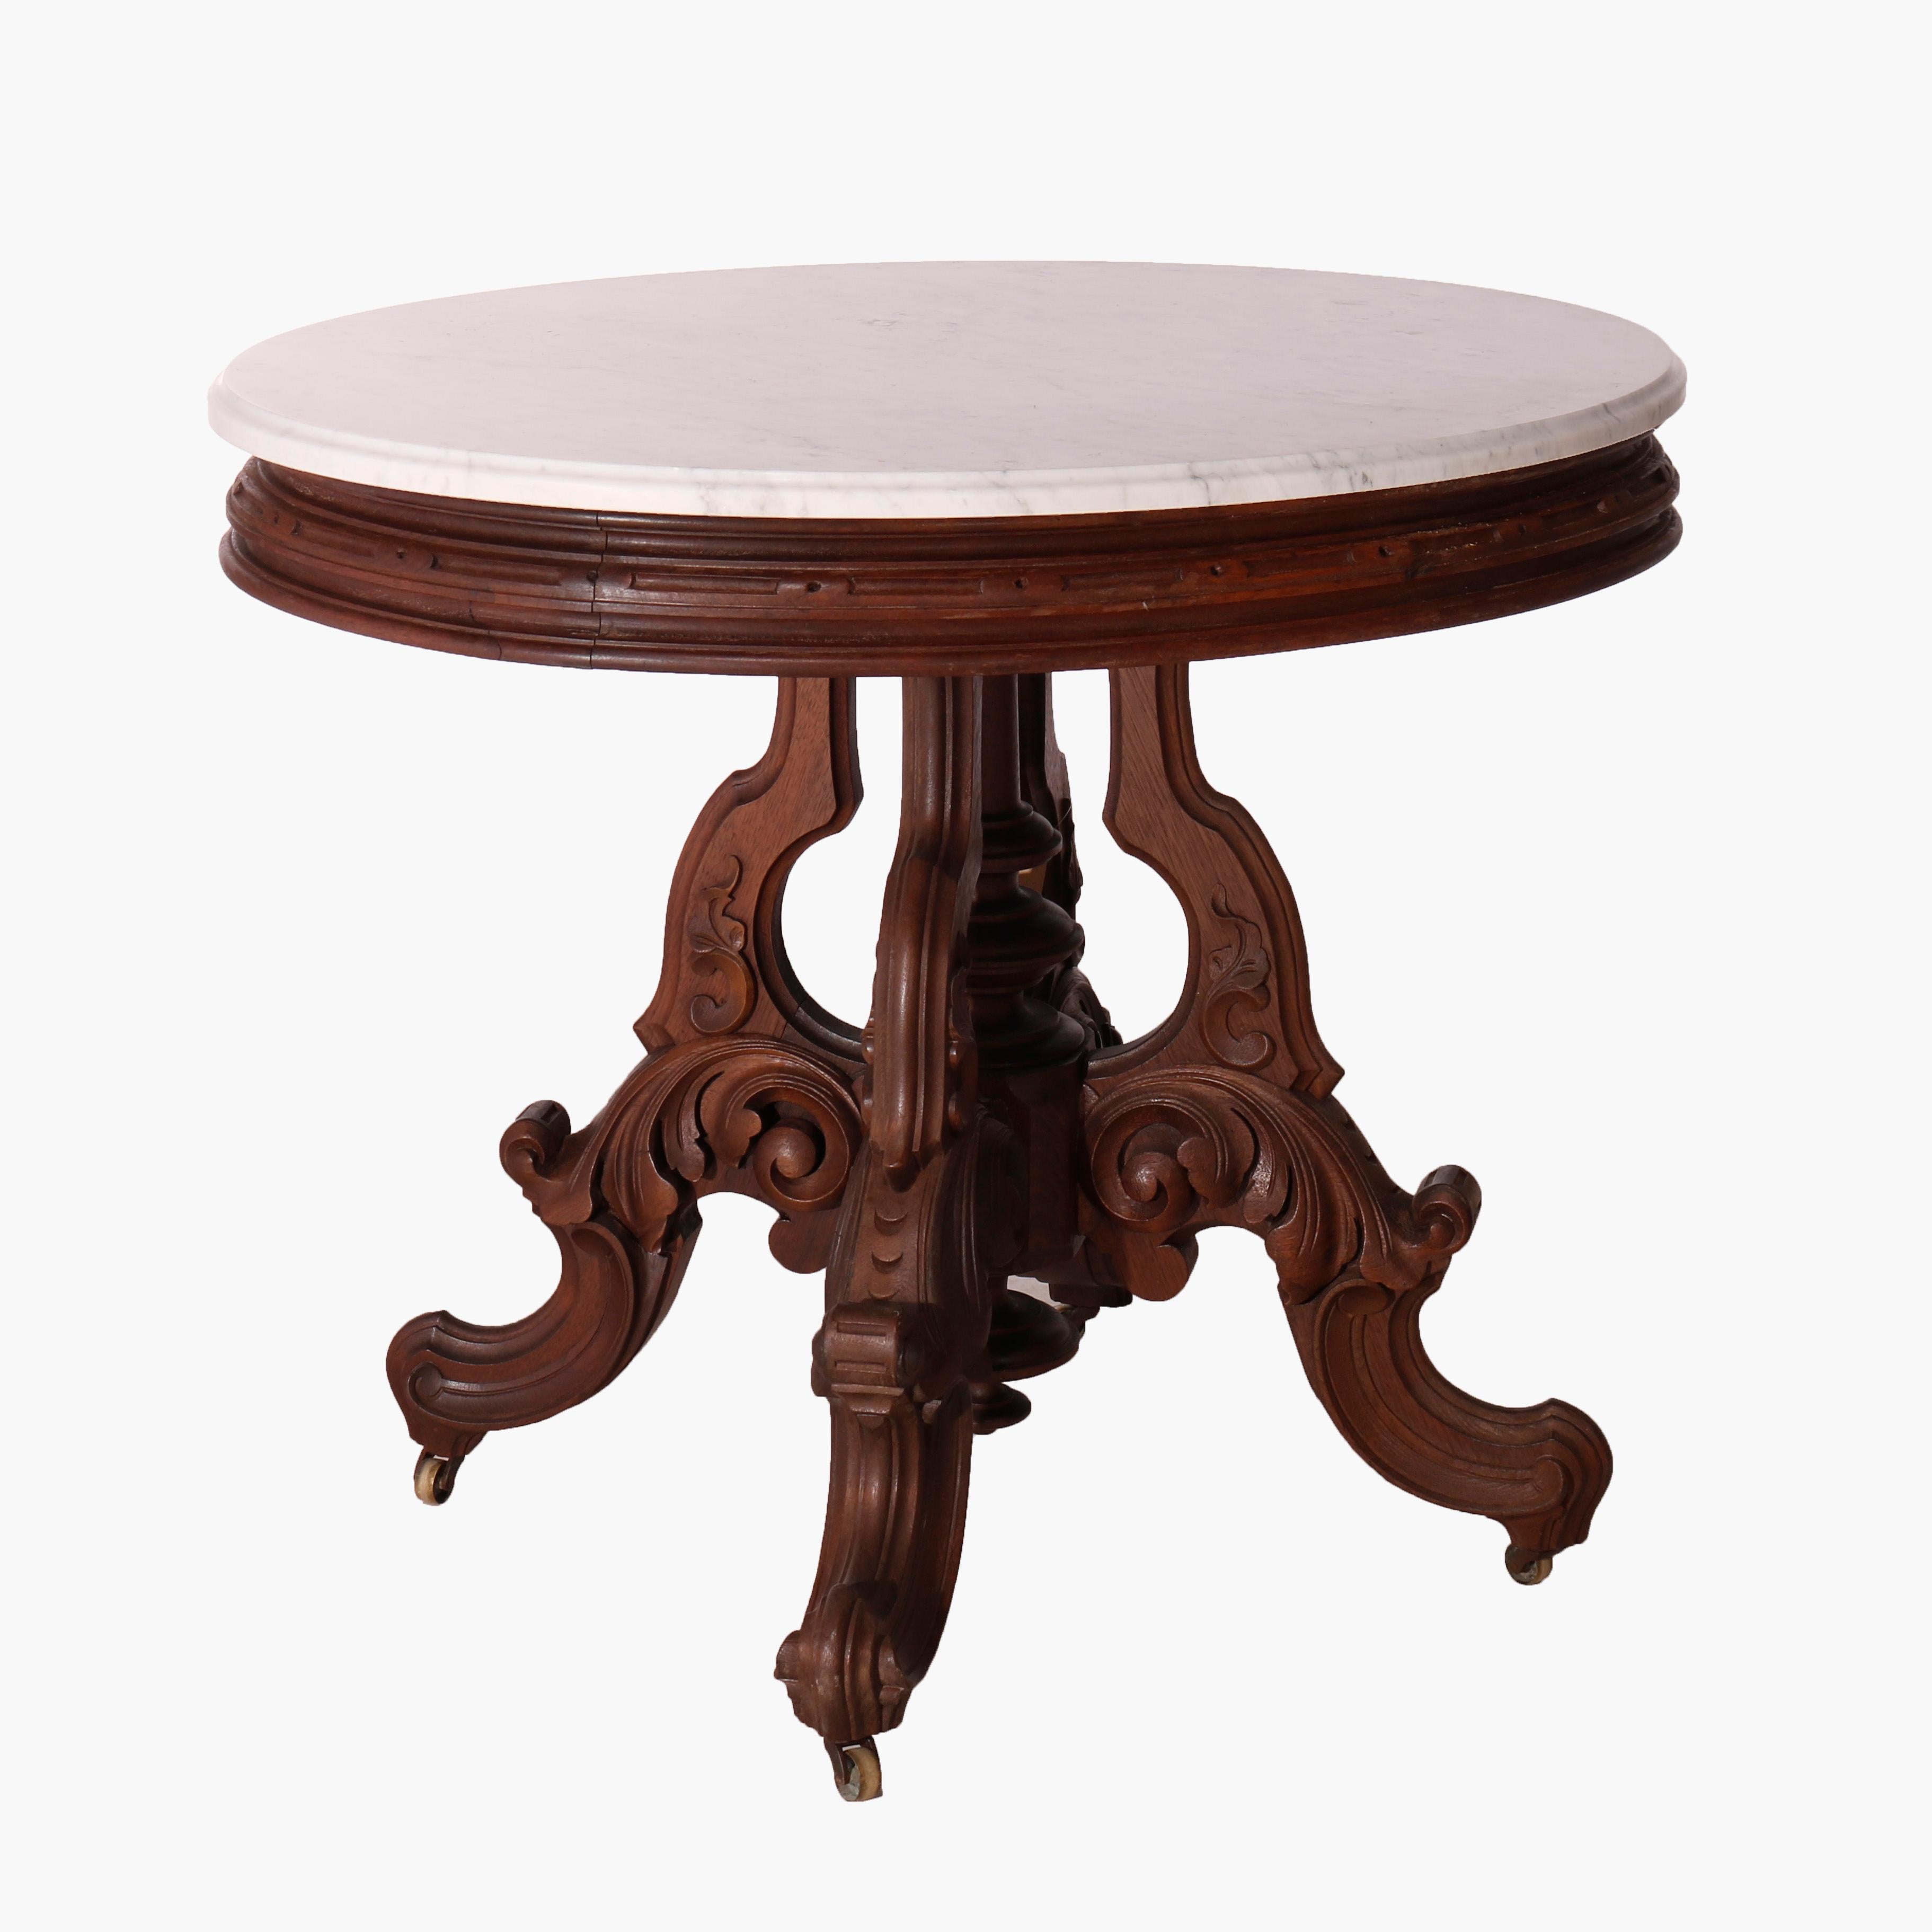 Oversized Antique Victorian Walnut Brooks Oval Marble Top Parlor Table 1890 For Sale 6